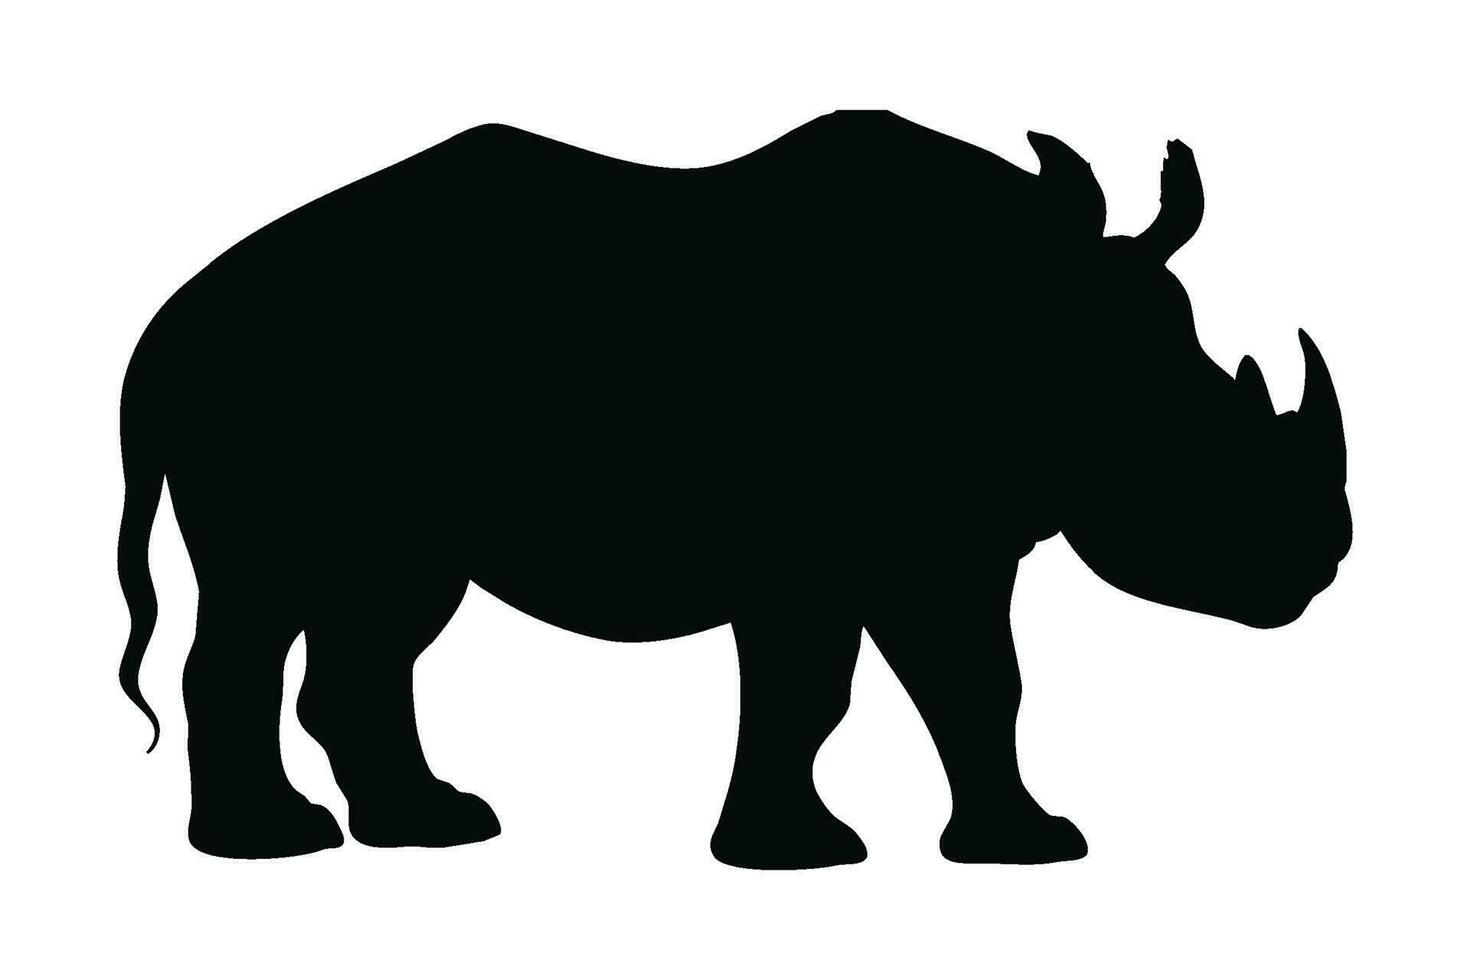 Dangerous rhinoceros standing in different positions. Rhino full body silhouette collection. Herbivorous rhino standing silhouette on a white background. Wild peaceful rhino silhouette bundle design. vector